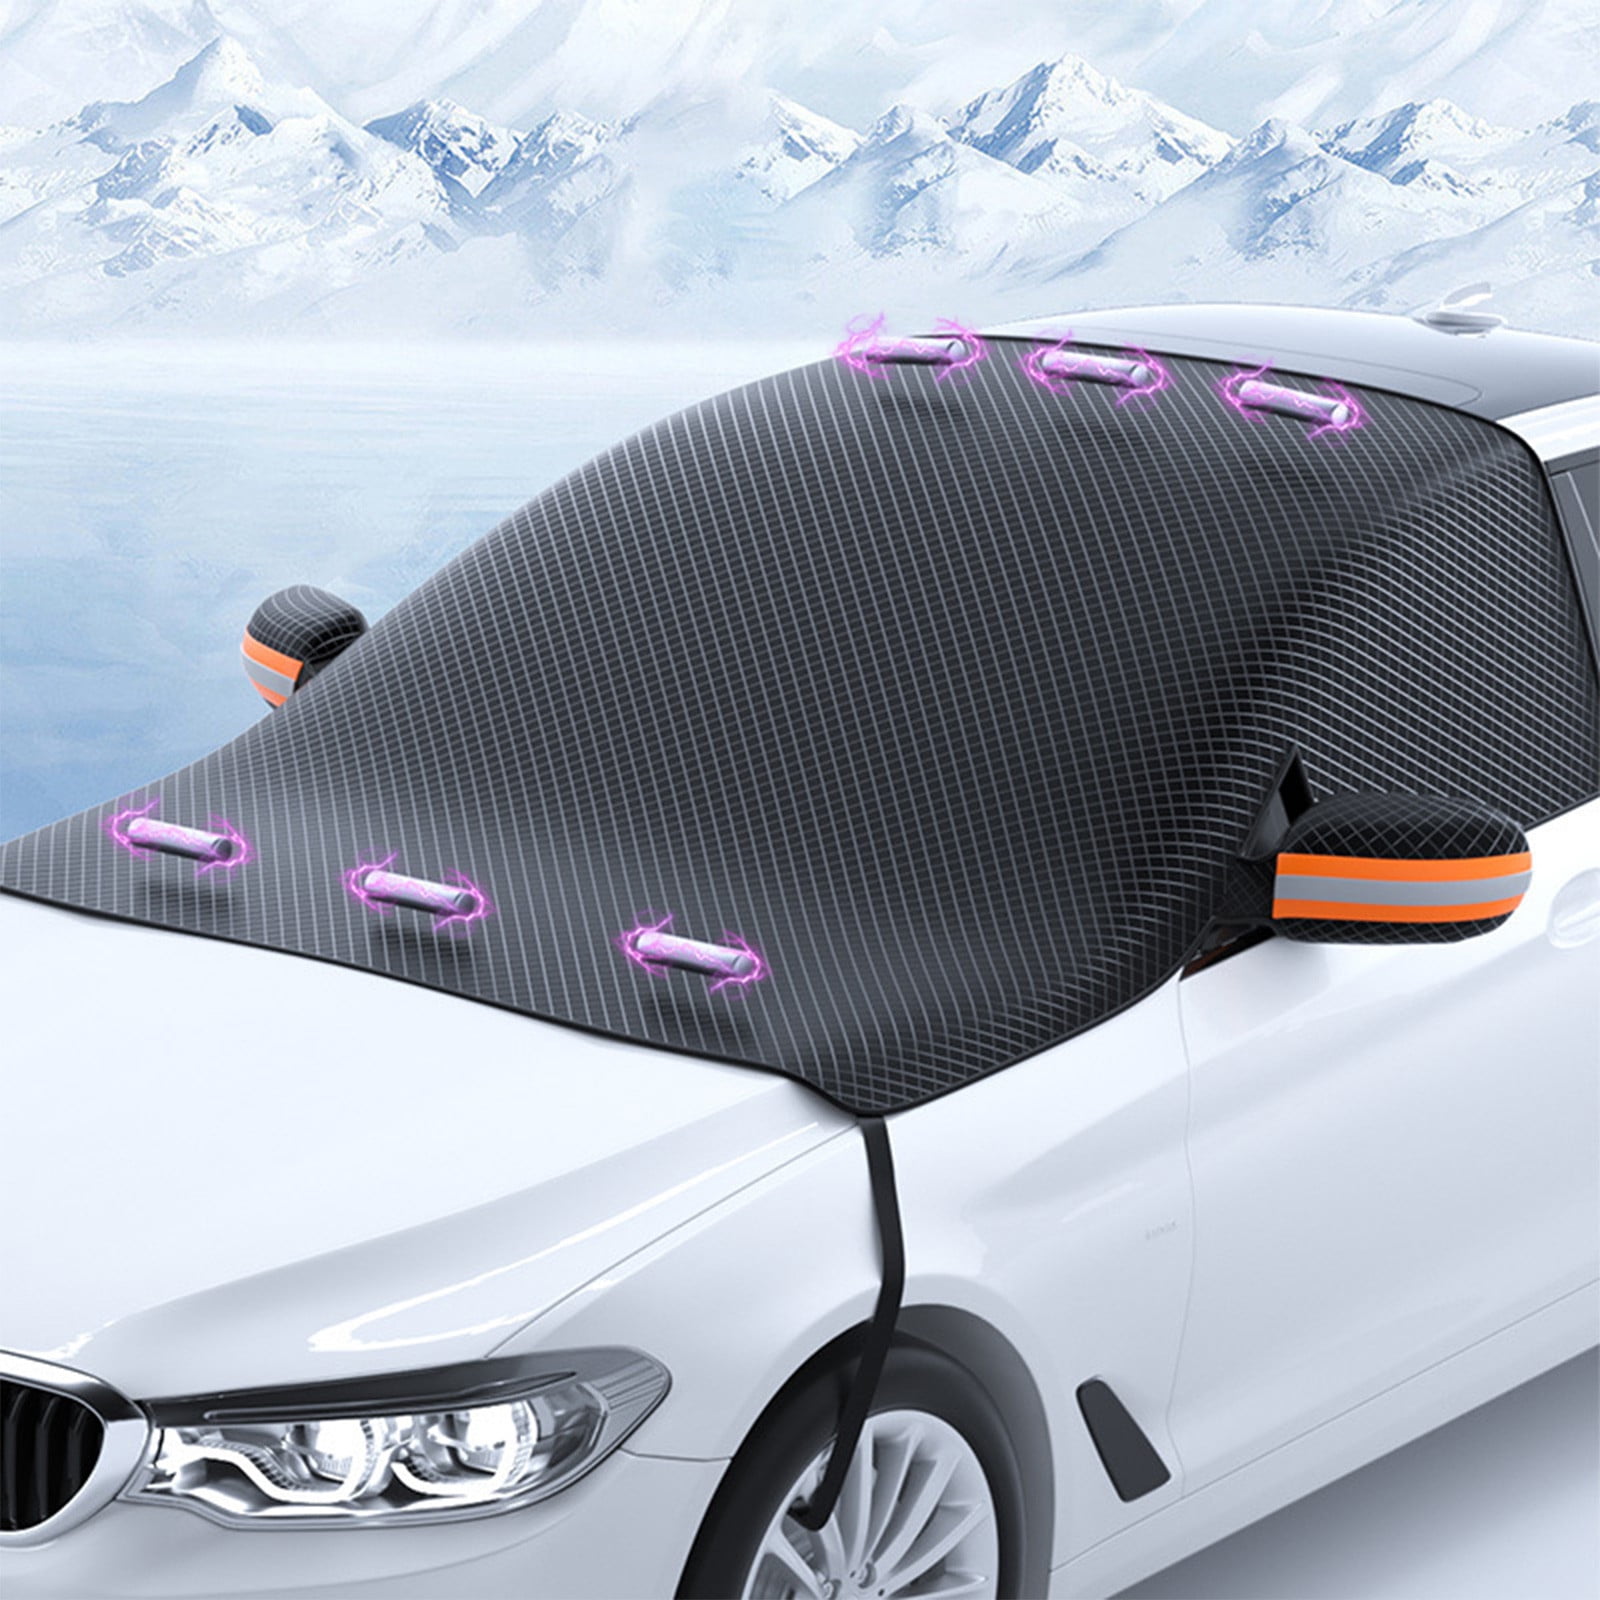 Magnetic Windshield Cover For Ice And Snow, Winter Windshield Snow Ice Cover  With Multi-Layer Protection, Front Window Covers Sunshade Frost Guard Ice  Shield Up to 65% off 